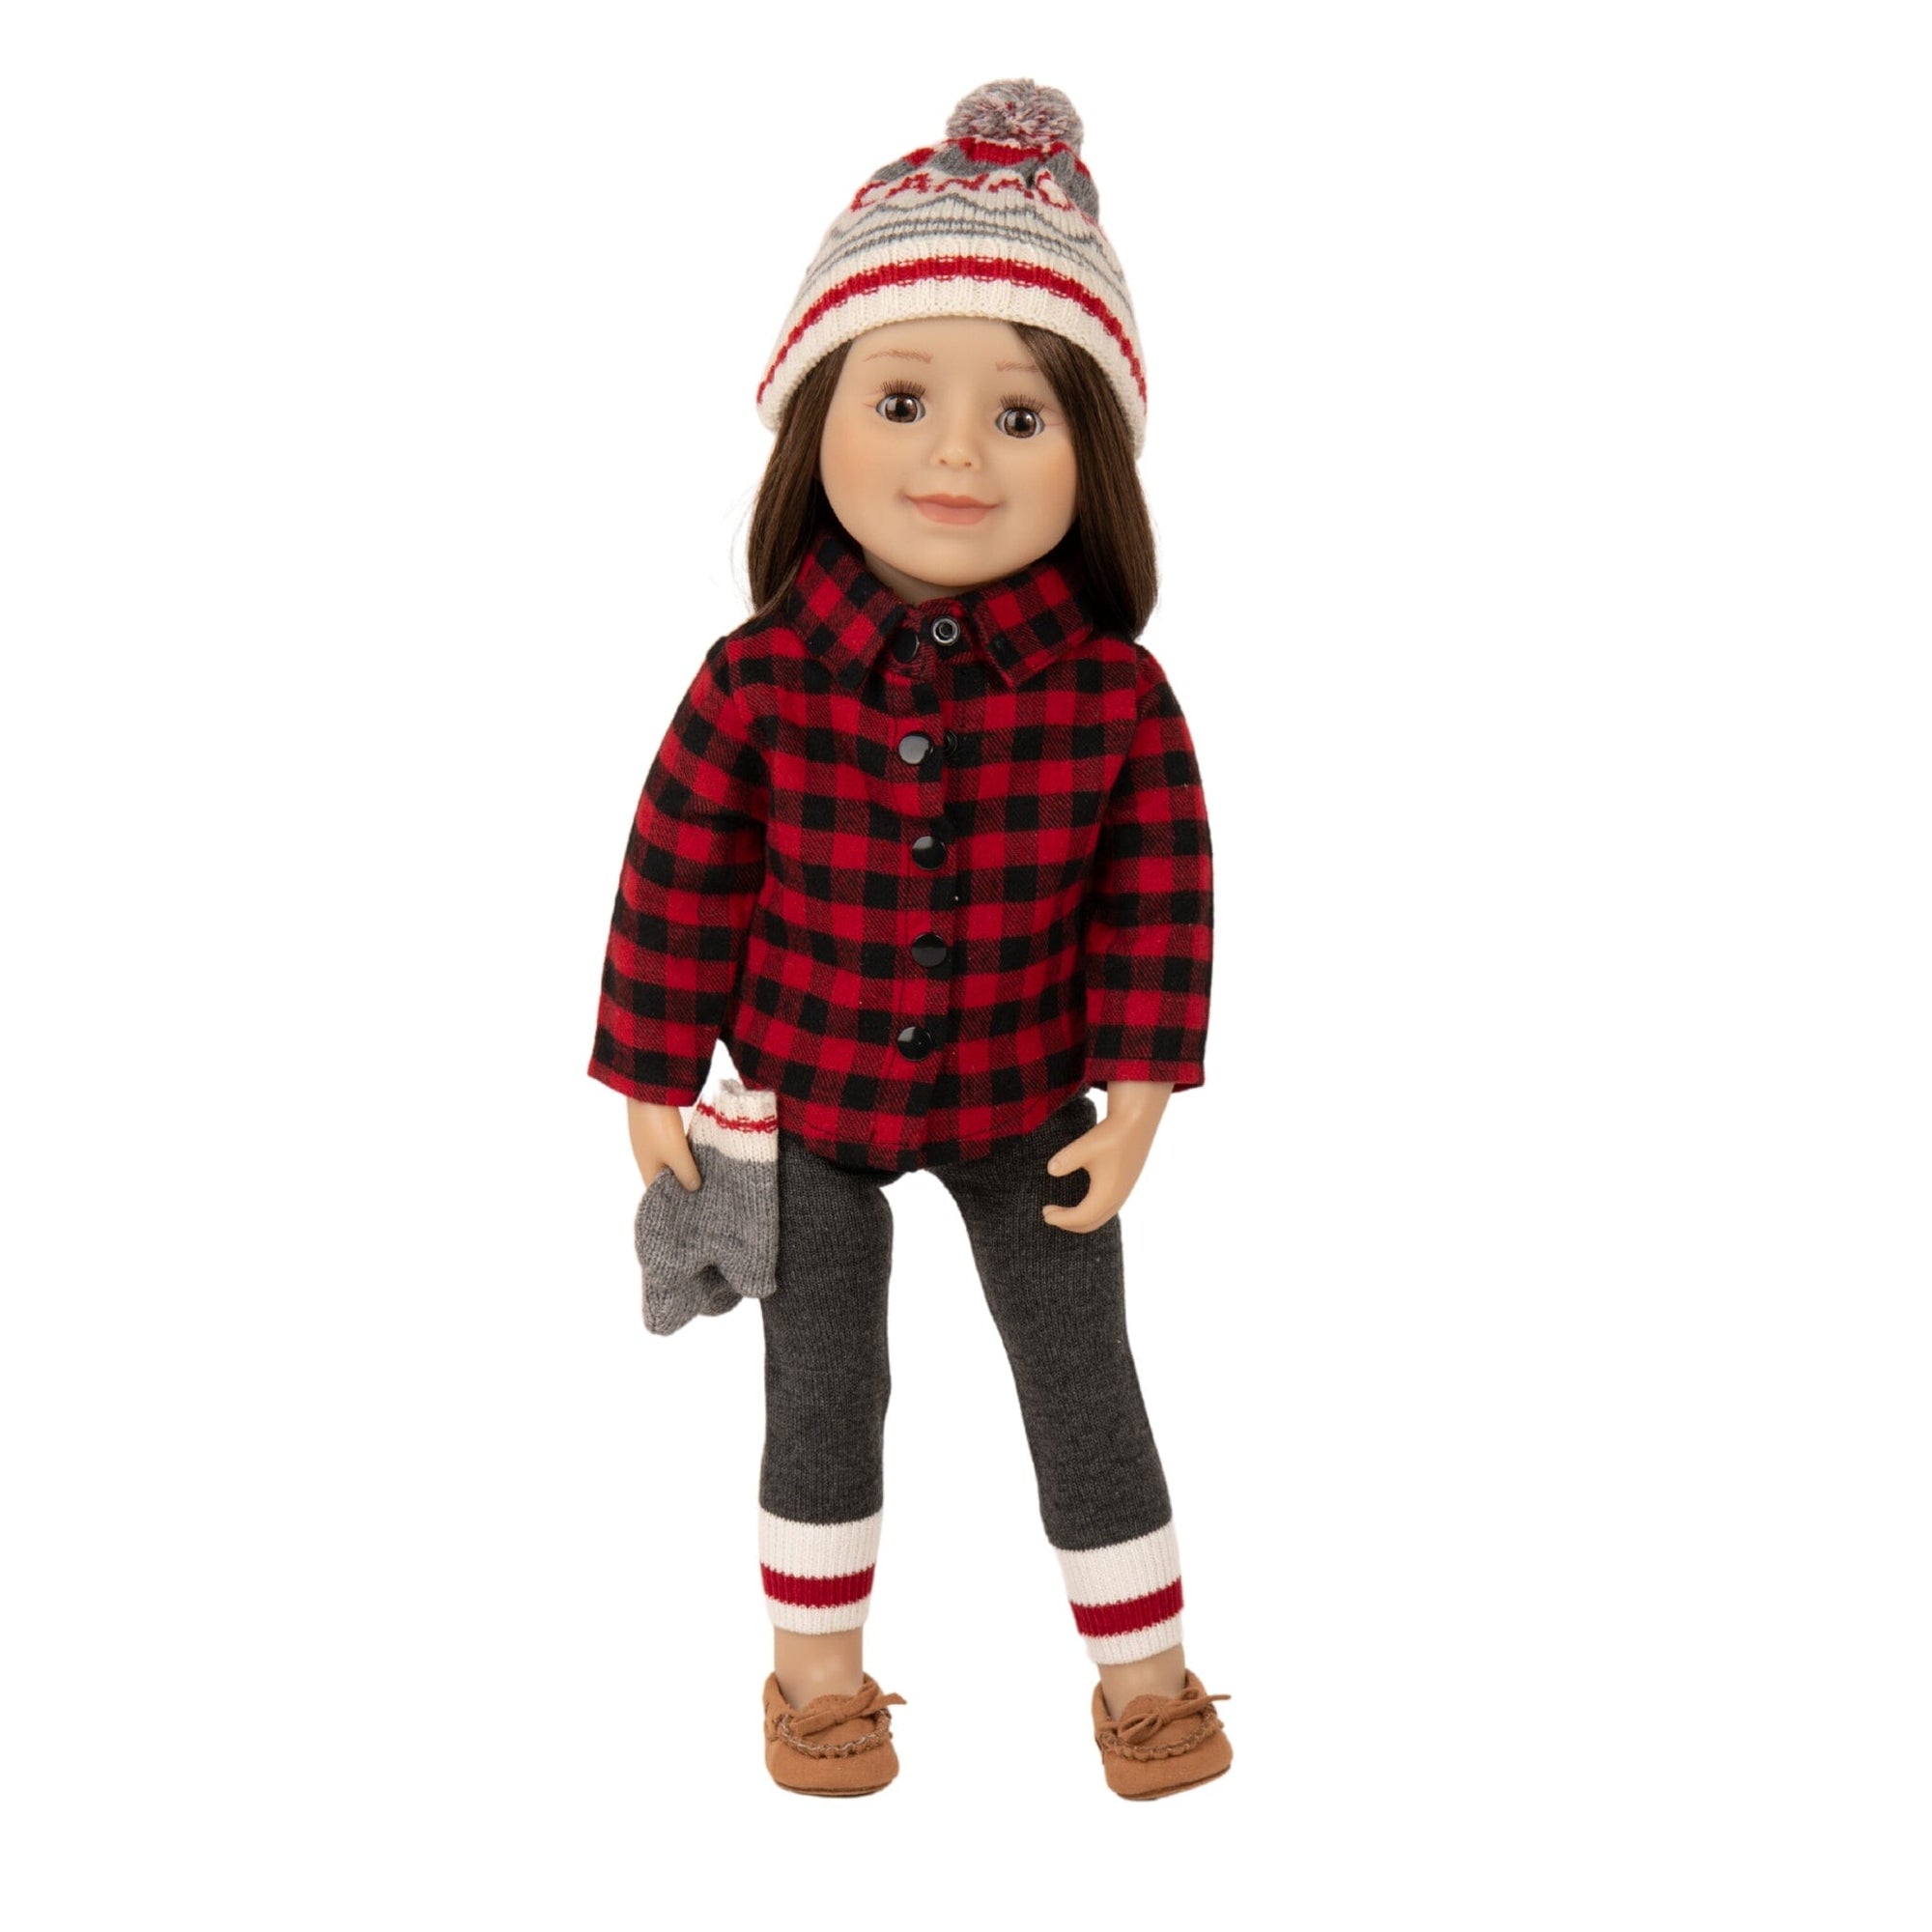 Canadian buffalo plaid shirt Canada hat grey leggings on Maplelea 18 inch doll wearing lace up boots